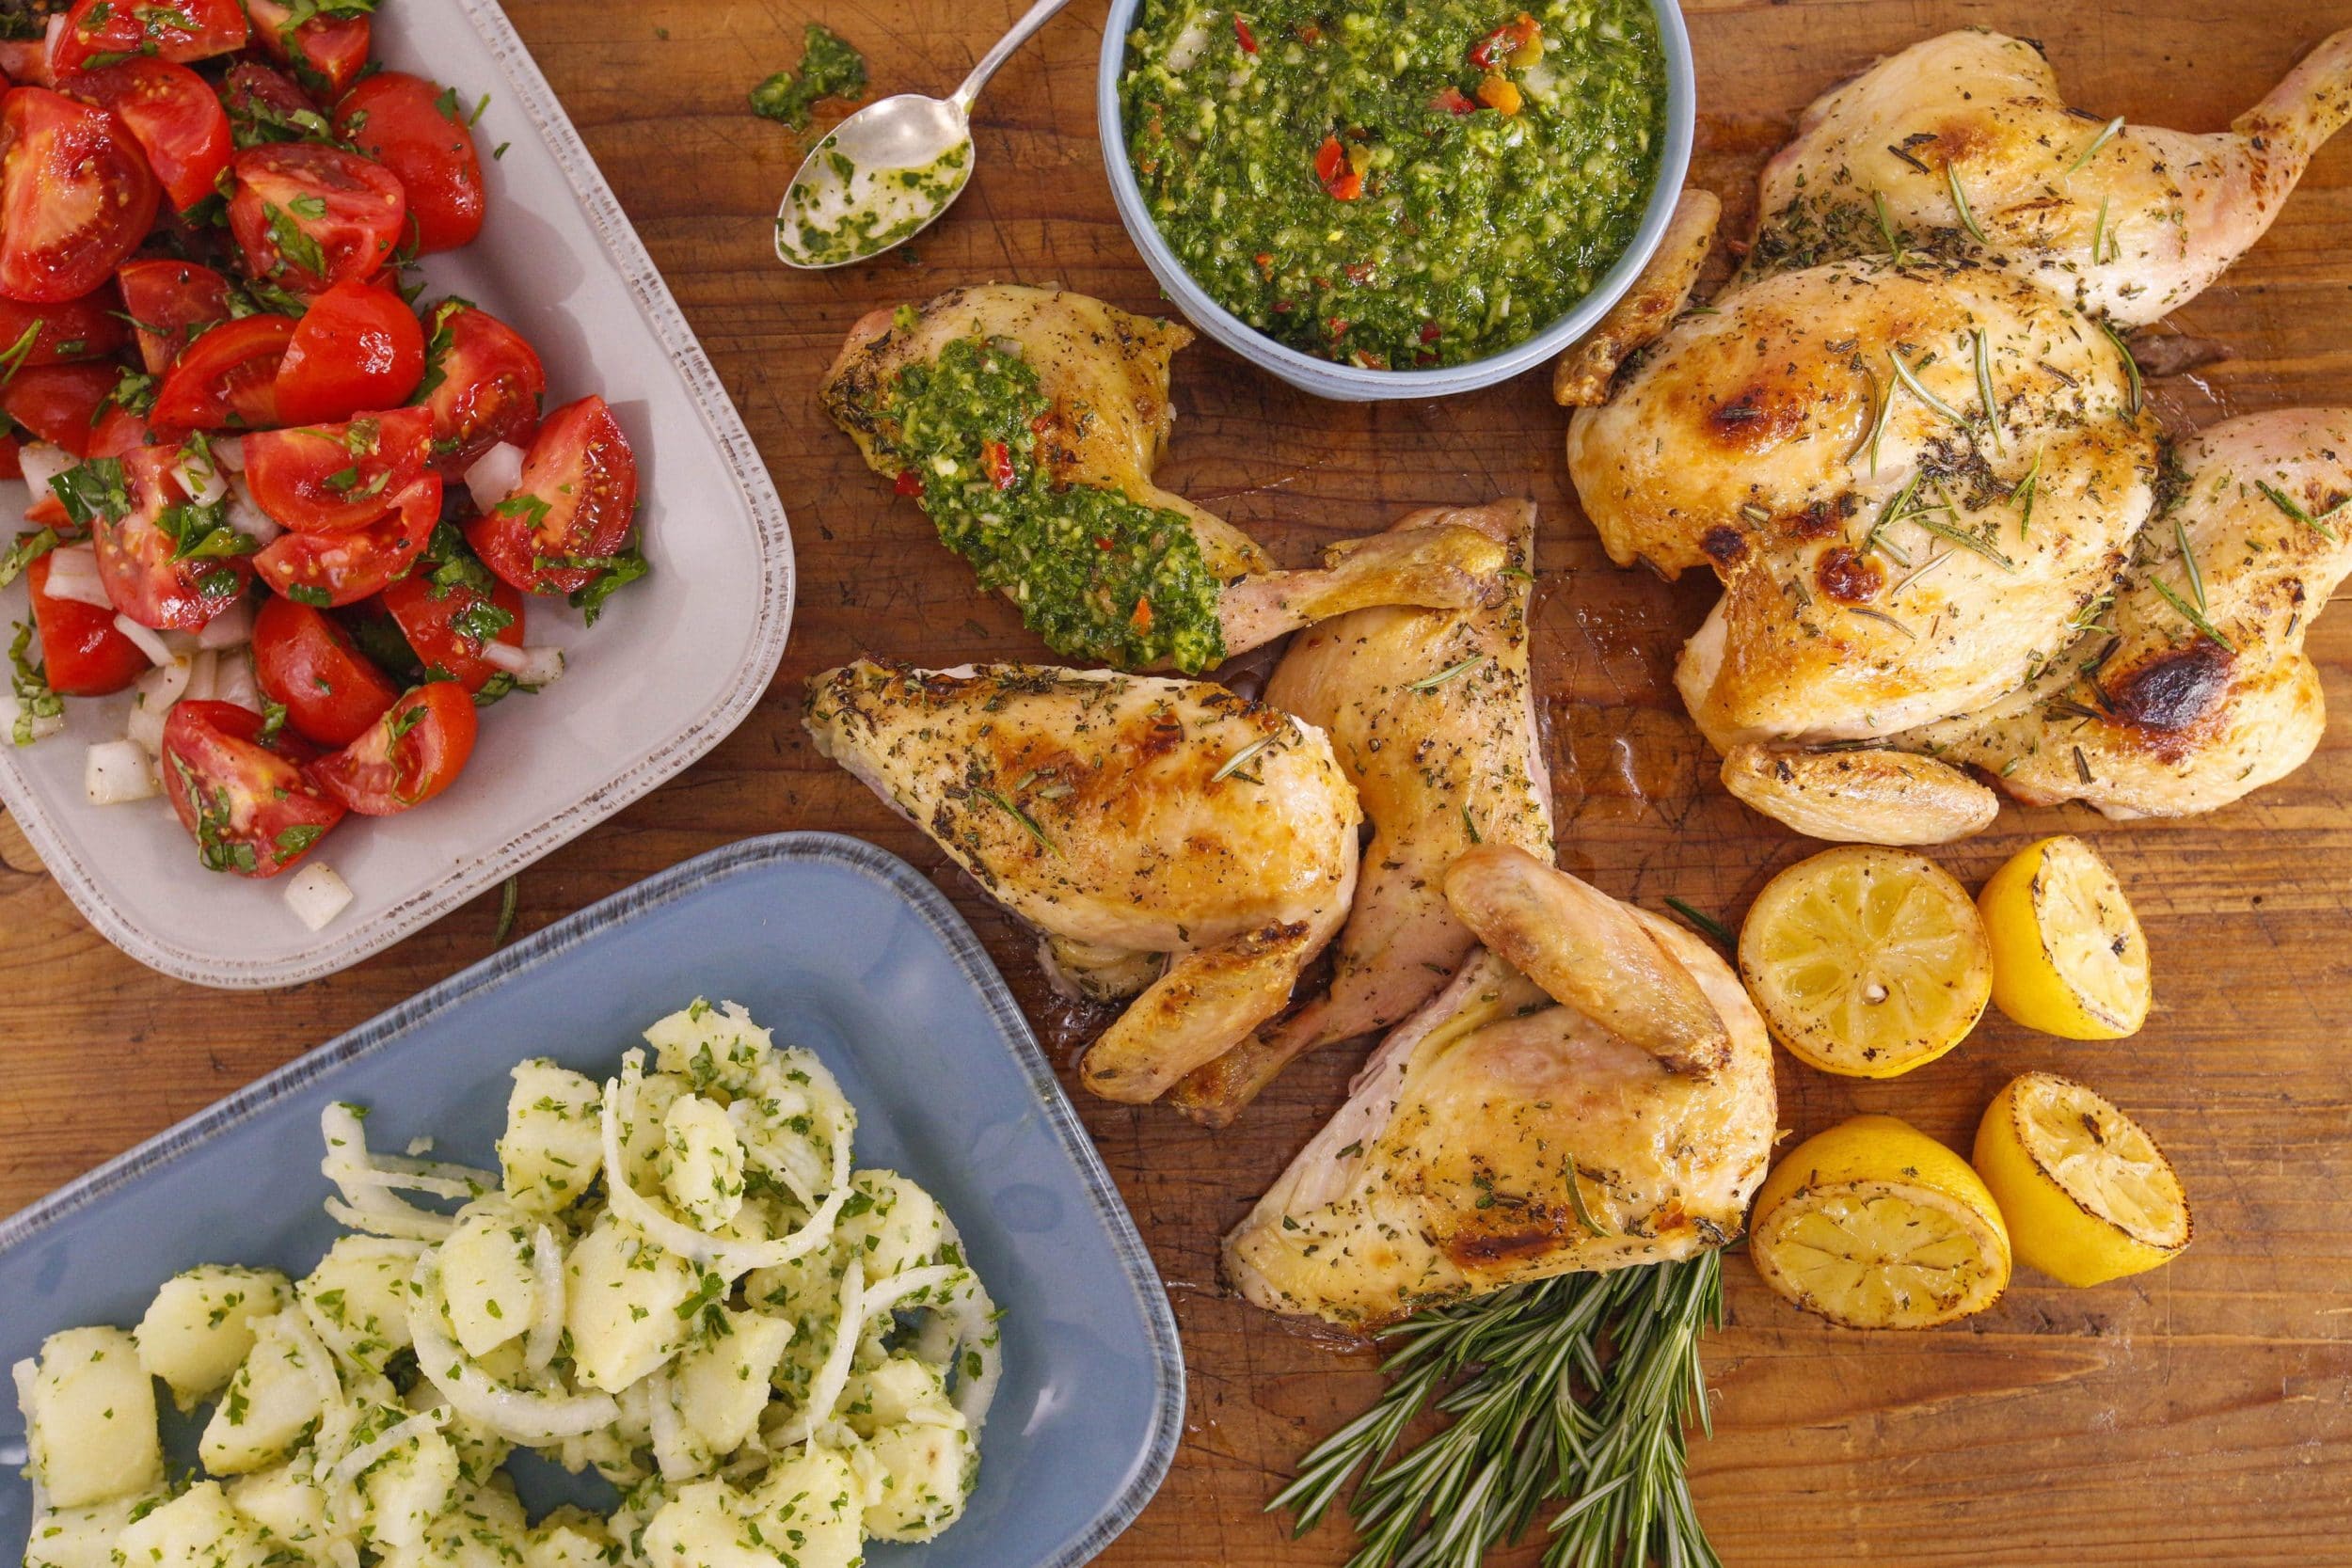 Garlicky Spatchcock Chicken with Parsley Chimichurri